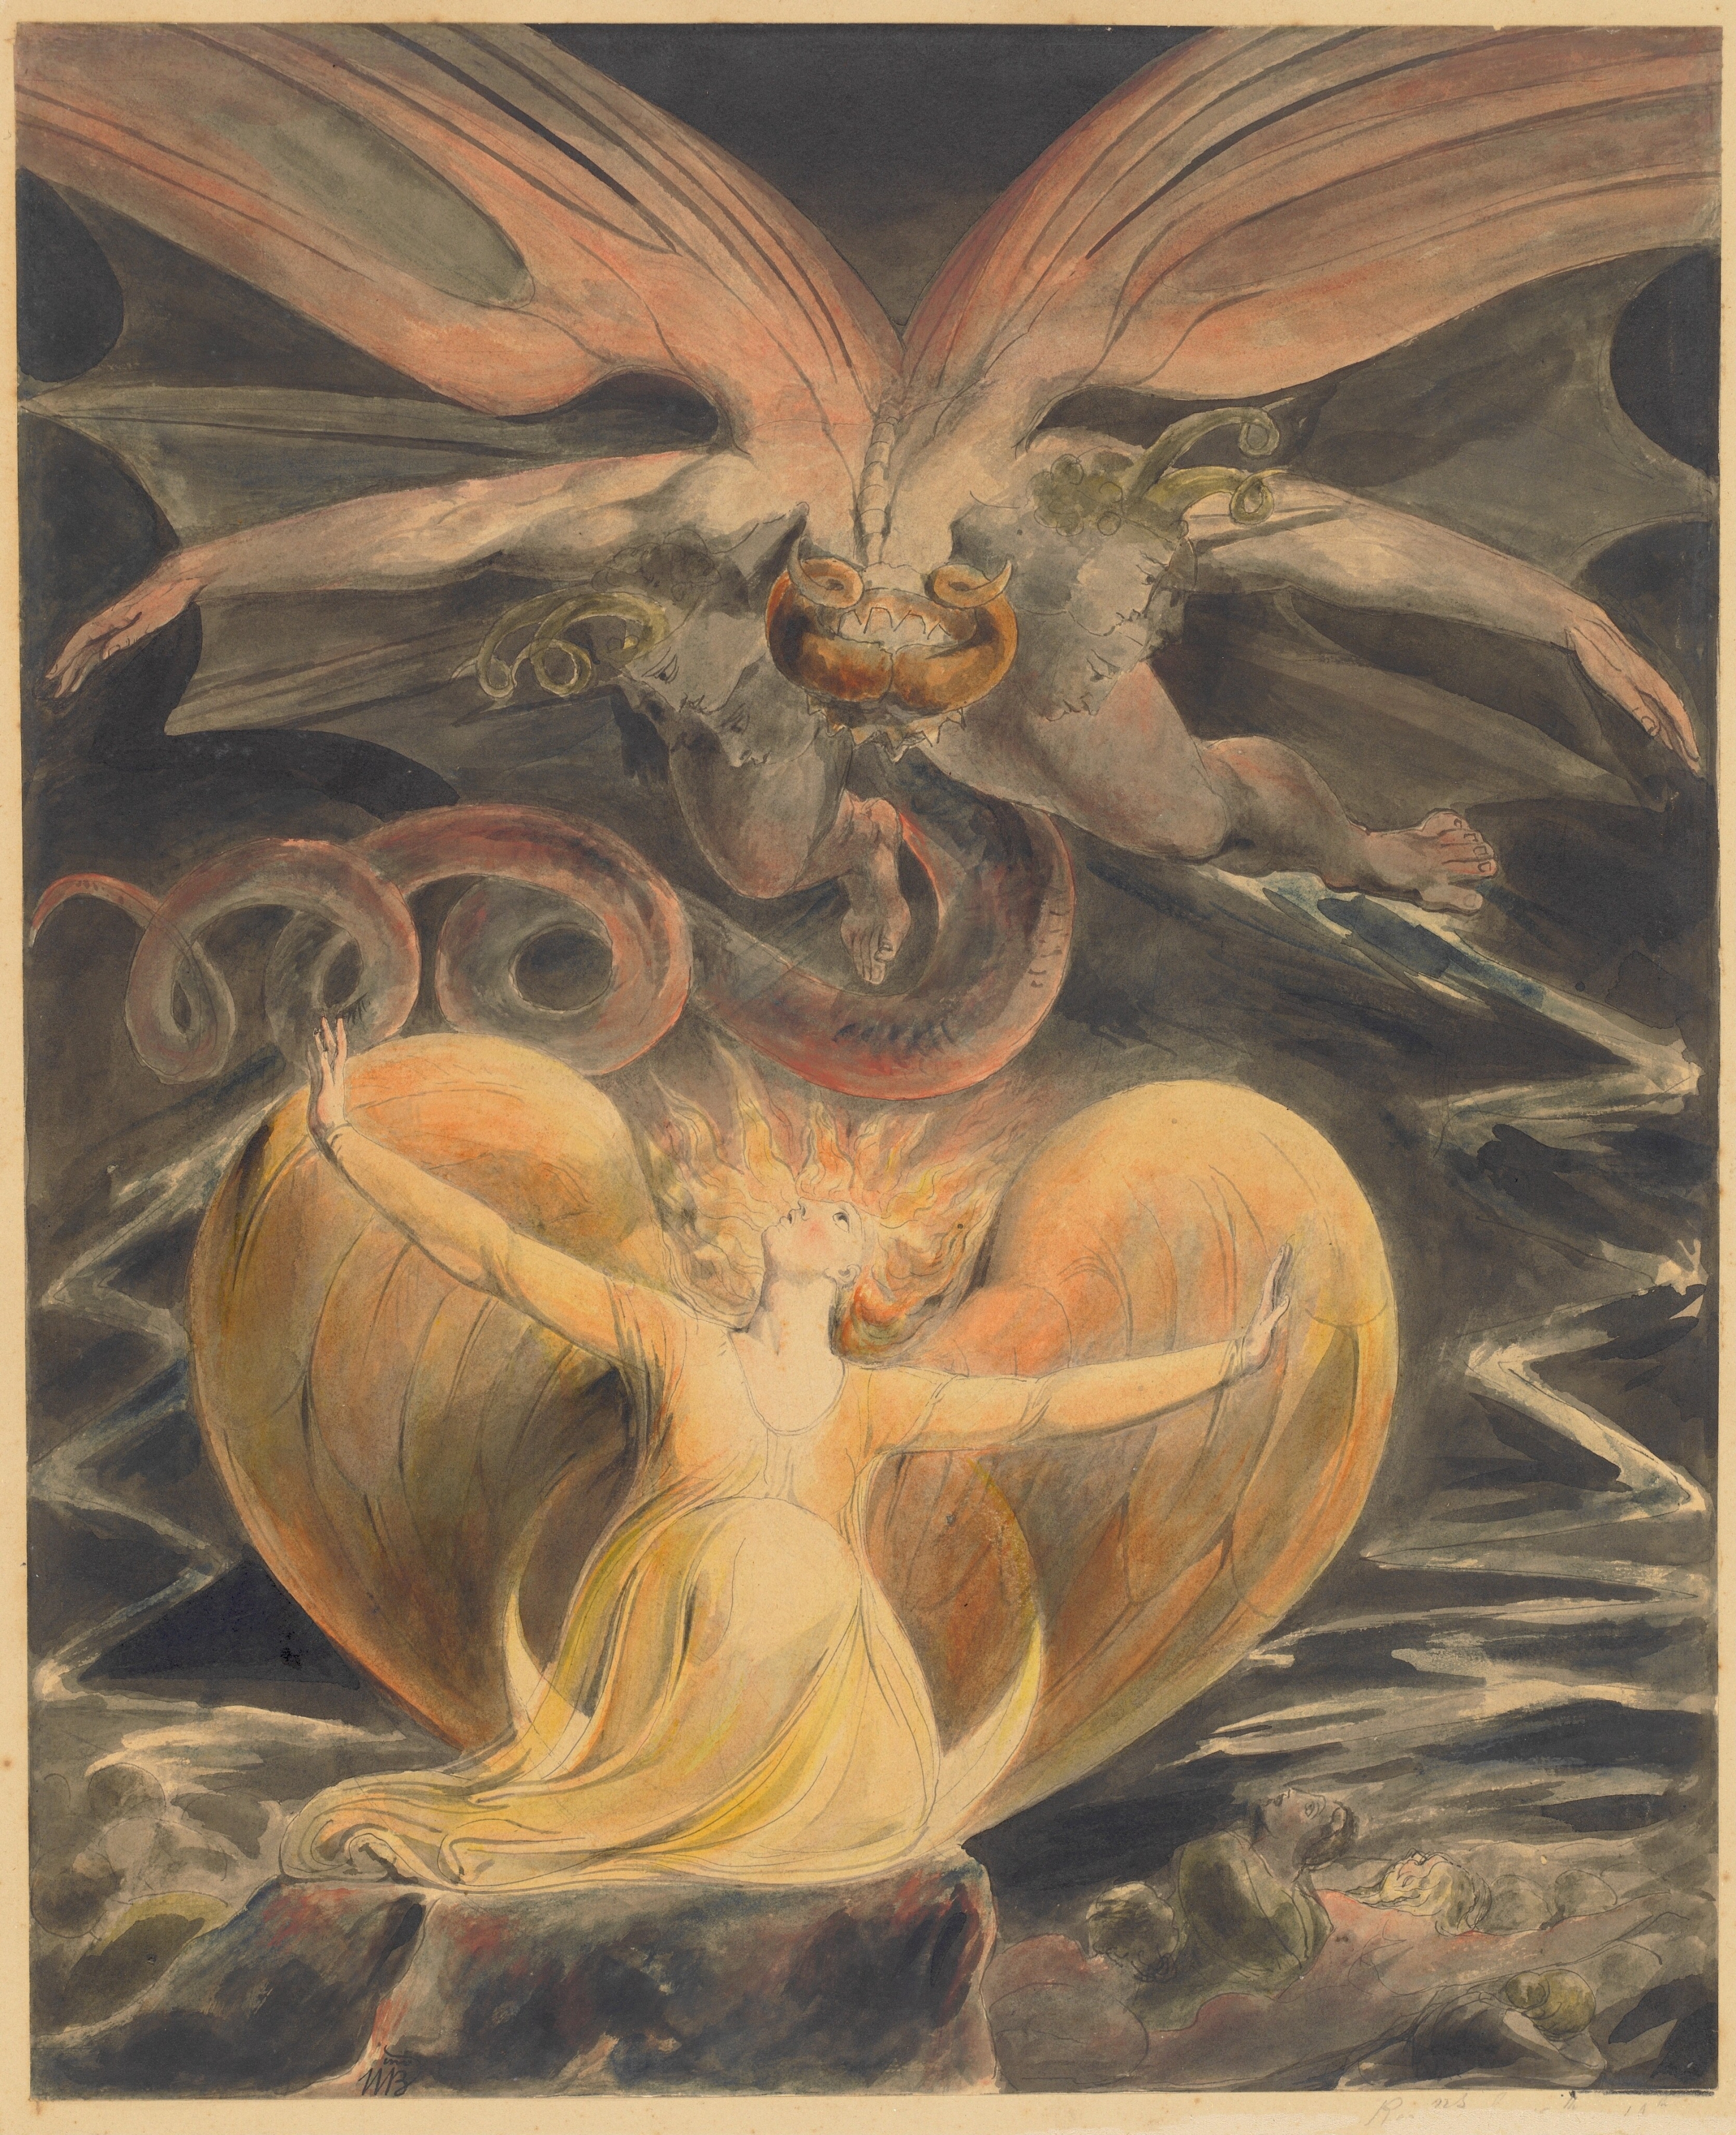 William Blake,&nbsp;The Great Red Dragon and the Woman Clothed with the Sun,&nbsp;
c. 1805, Pen and gray ink with watercolor over graphite, 16.25 x 13.25 inches
Courtesy of the National Gallery of Art.